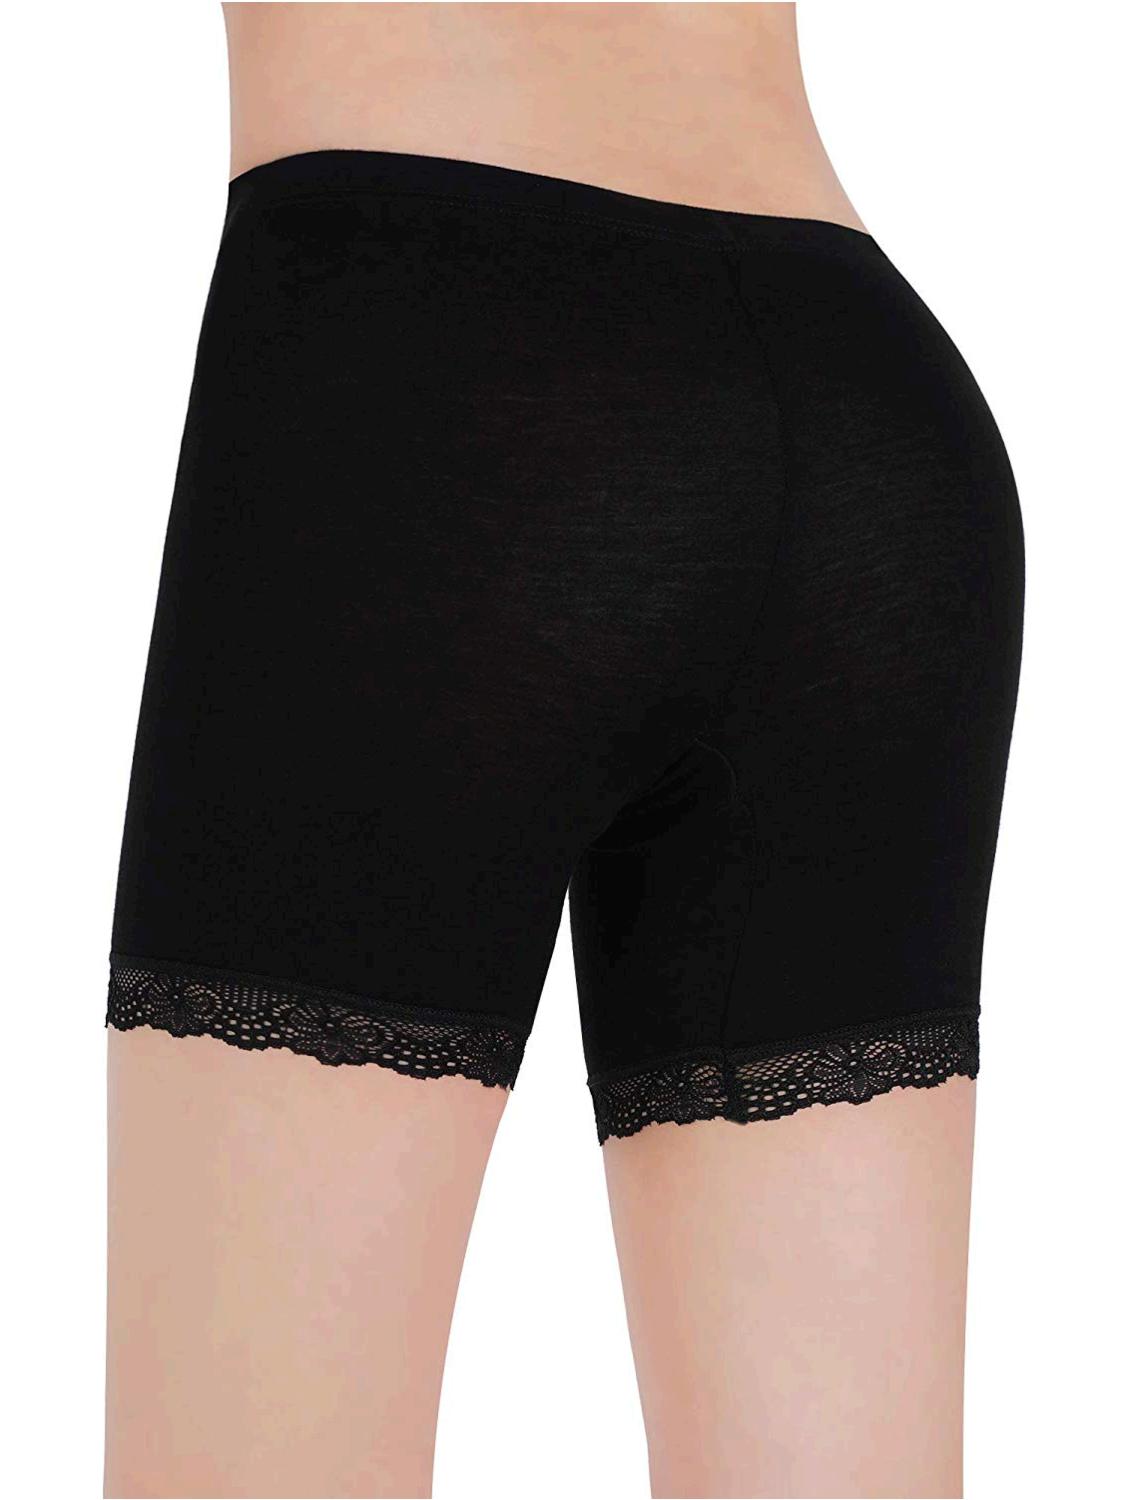 https://images.shoefabs.com/pp-d359278f/l/debc38b4a5f8f0/3-Pieces-Anti-Chafing-Modal-Panties-Lace-Yoga-Shorts-Stretch-Underwears-for-Women-and-Girls-Color-Set-2--L-Color-Set-2-debc38b4a5f8f0.jpg